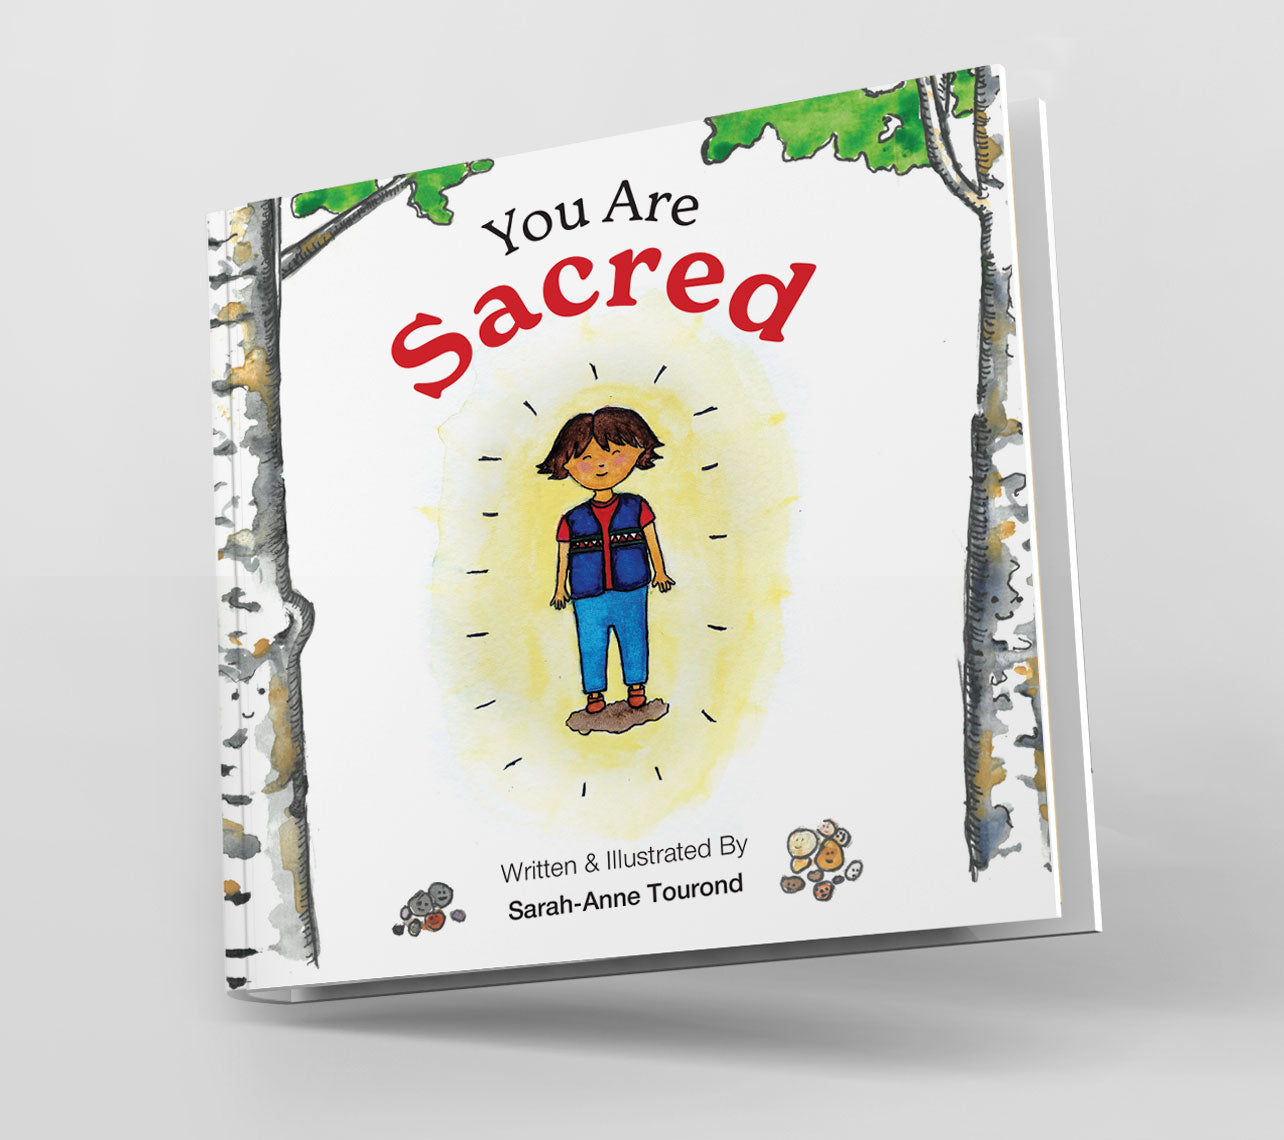 Load video: You Are Sacred 2nd edition announcement plus a new book is being added to the series!